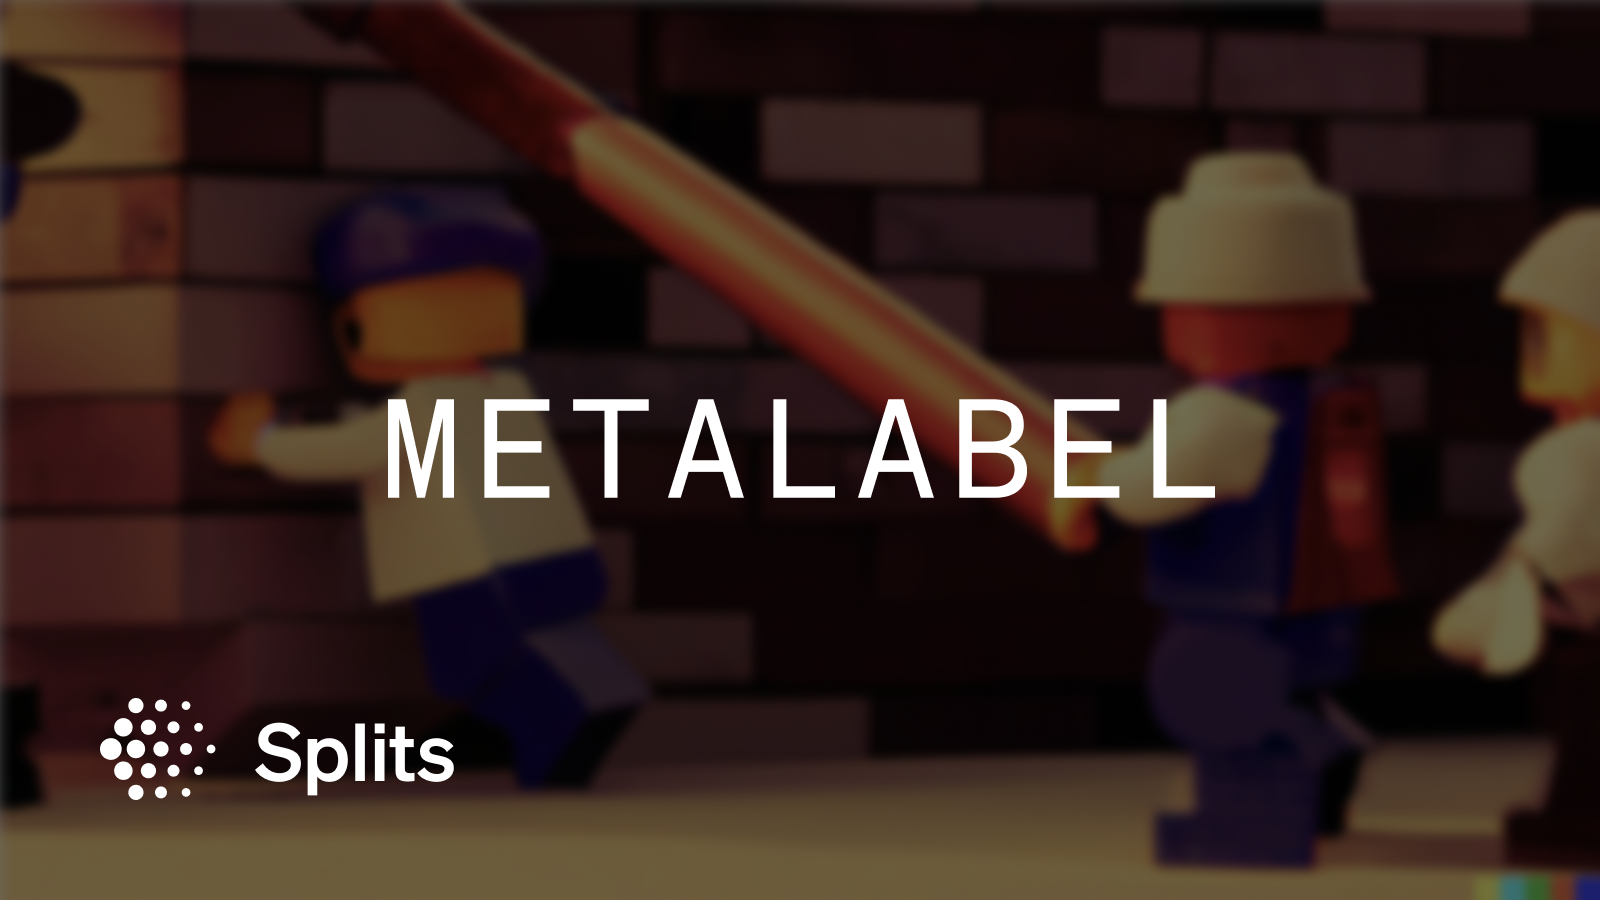 Metalabel is creativity in multiplayer mode